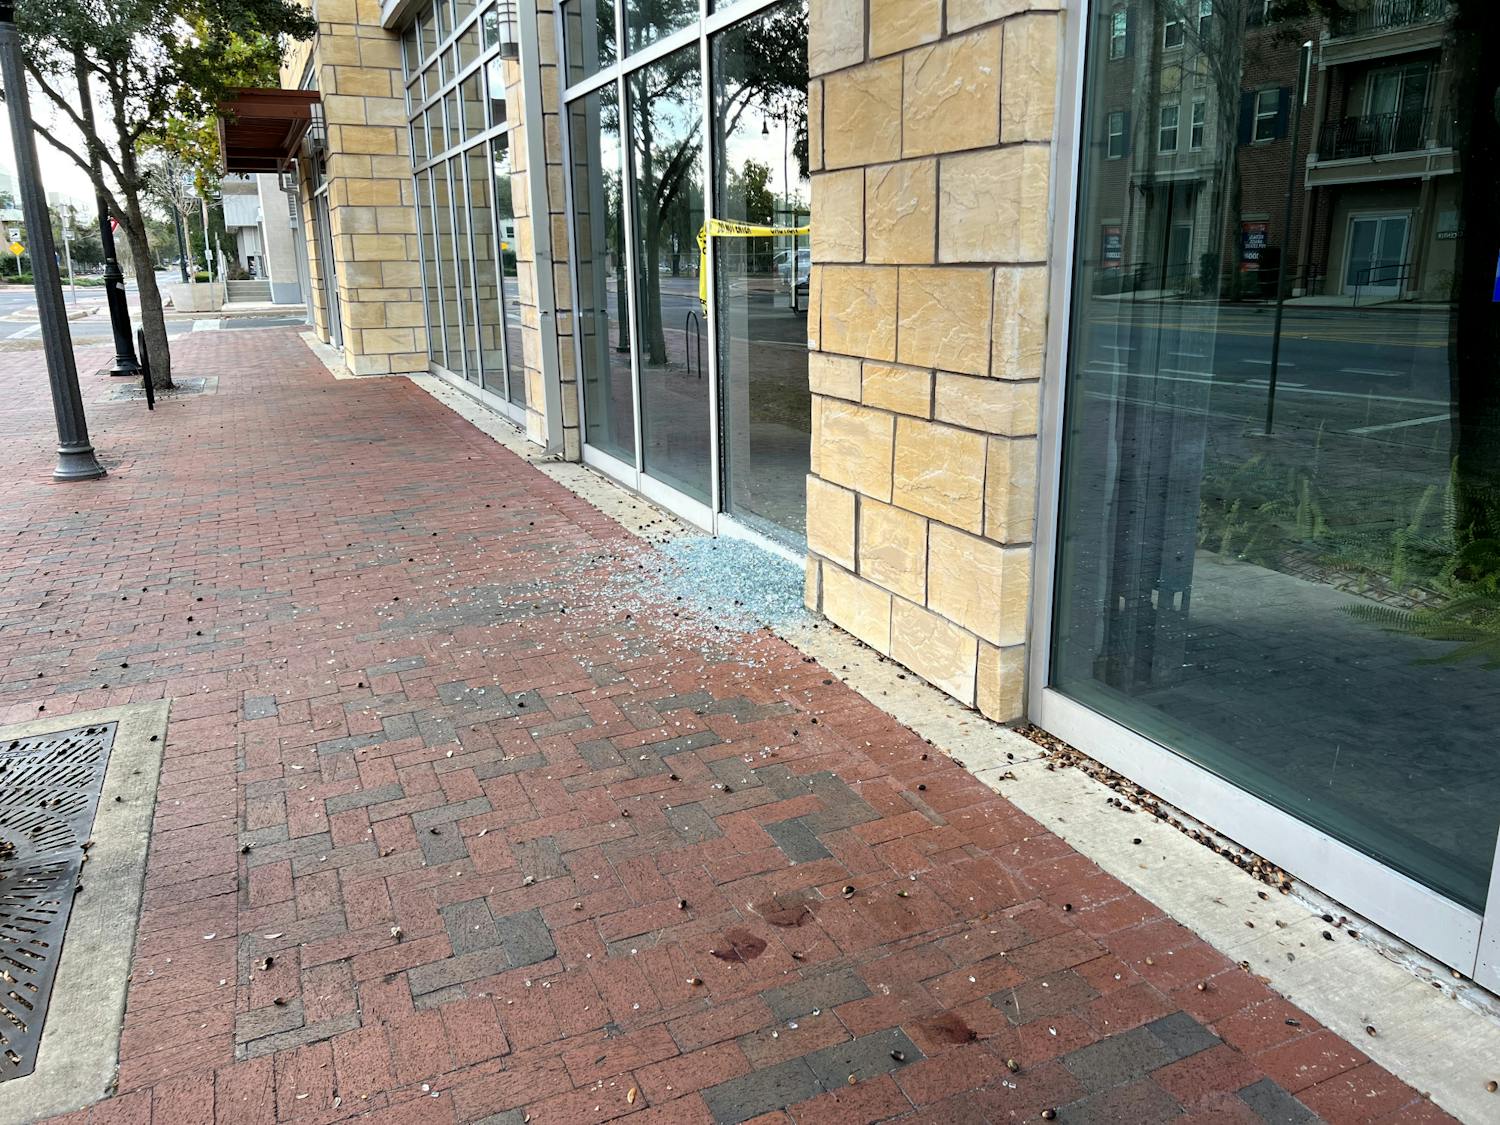 Shattered glass and blood on the sidewalk after Saturday's shooting